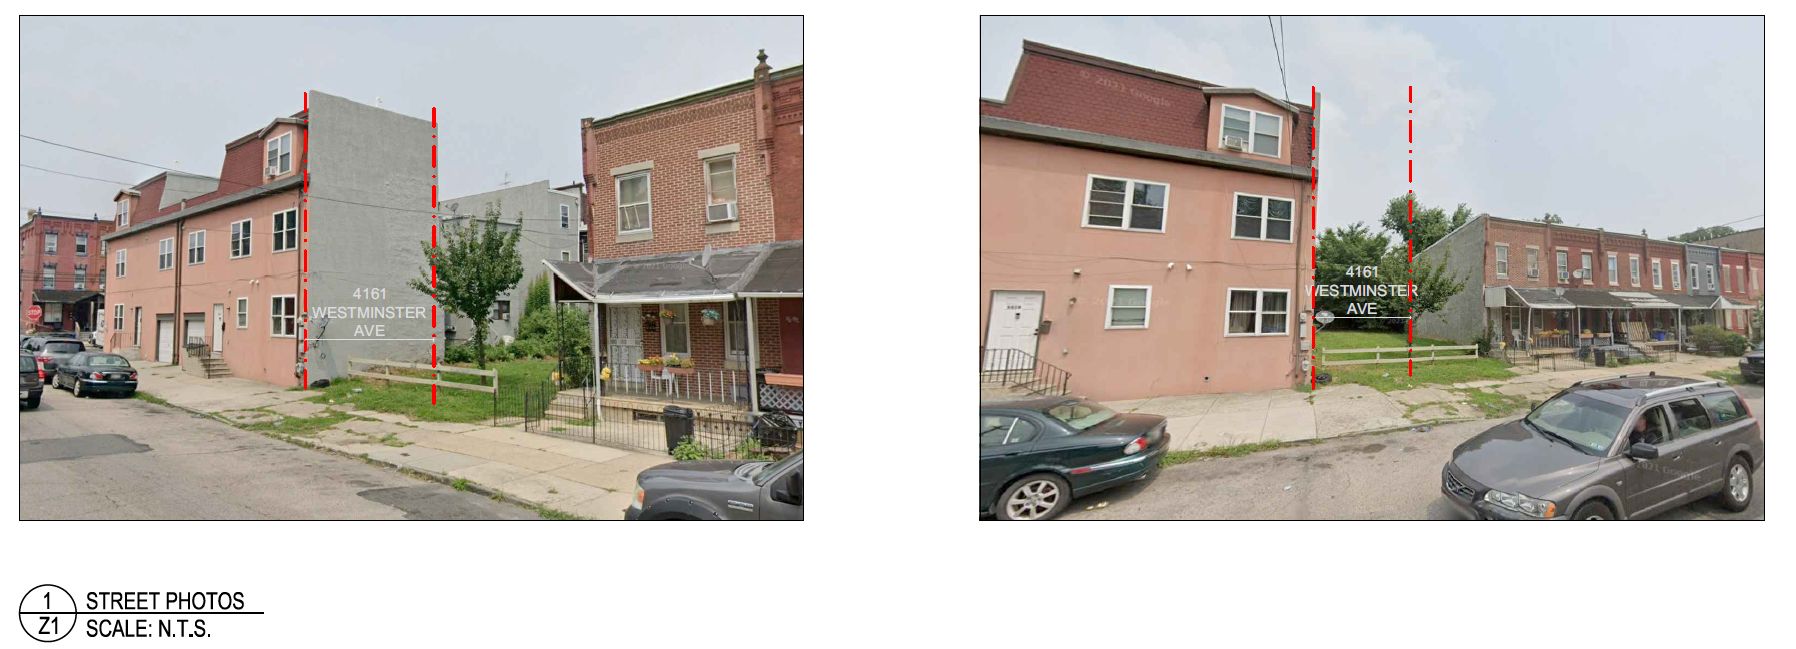 4161 Westminster Avenue. Existing site conditions. Credit: JT Ran Expediting via the City of Philadelphia